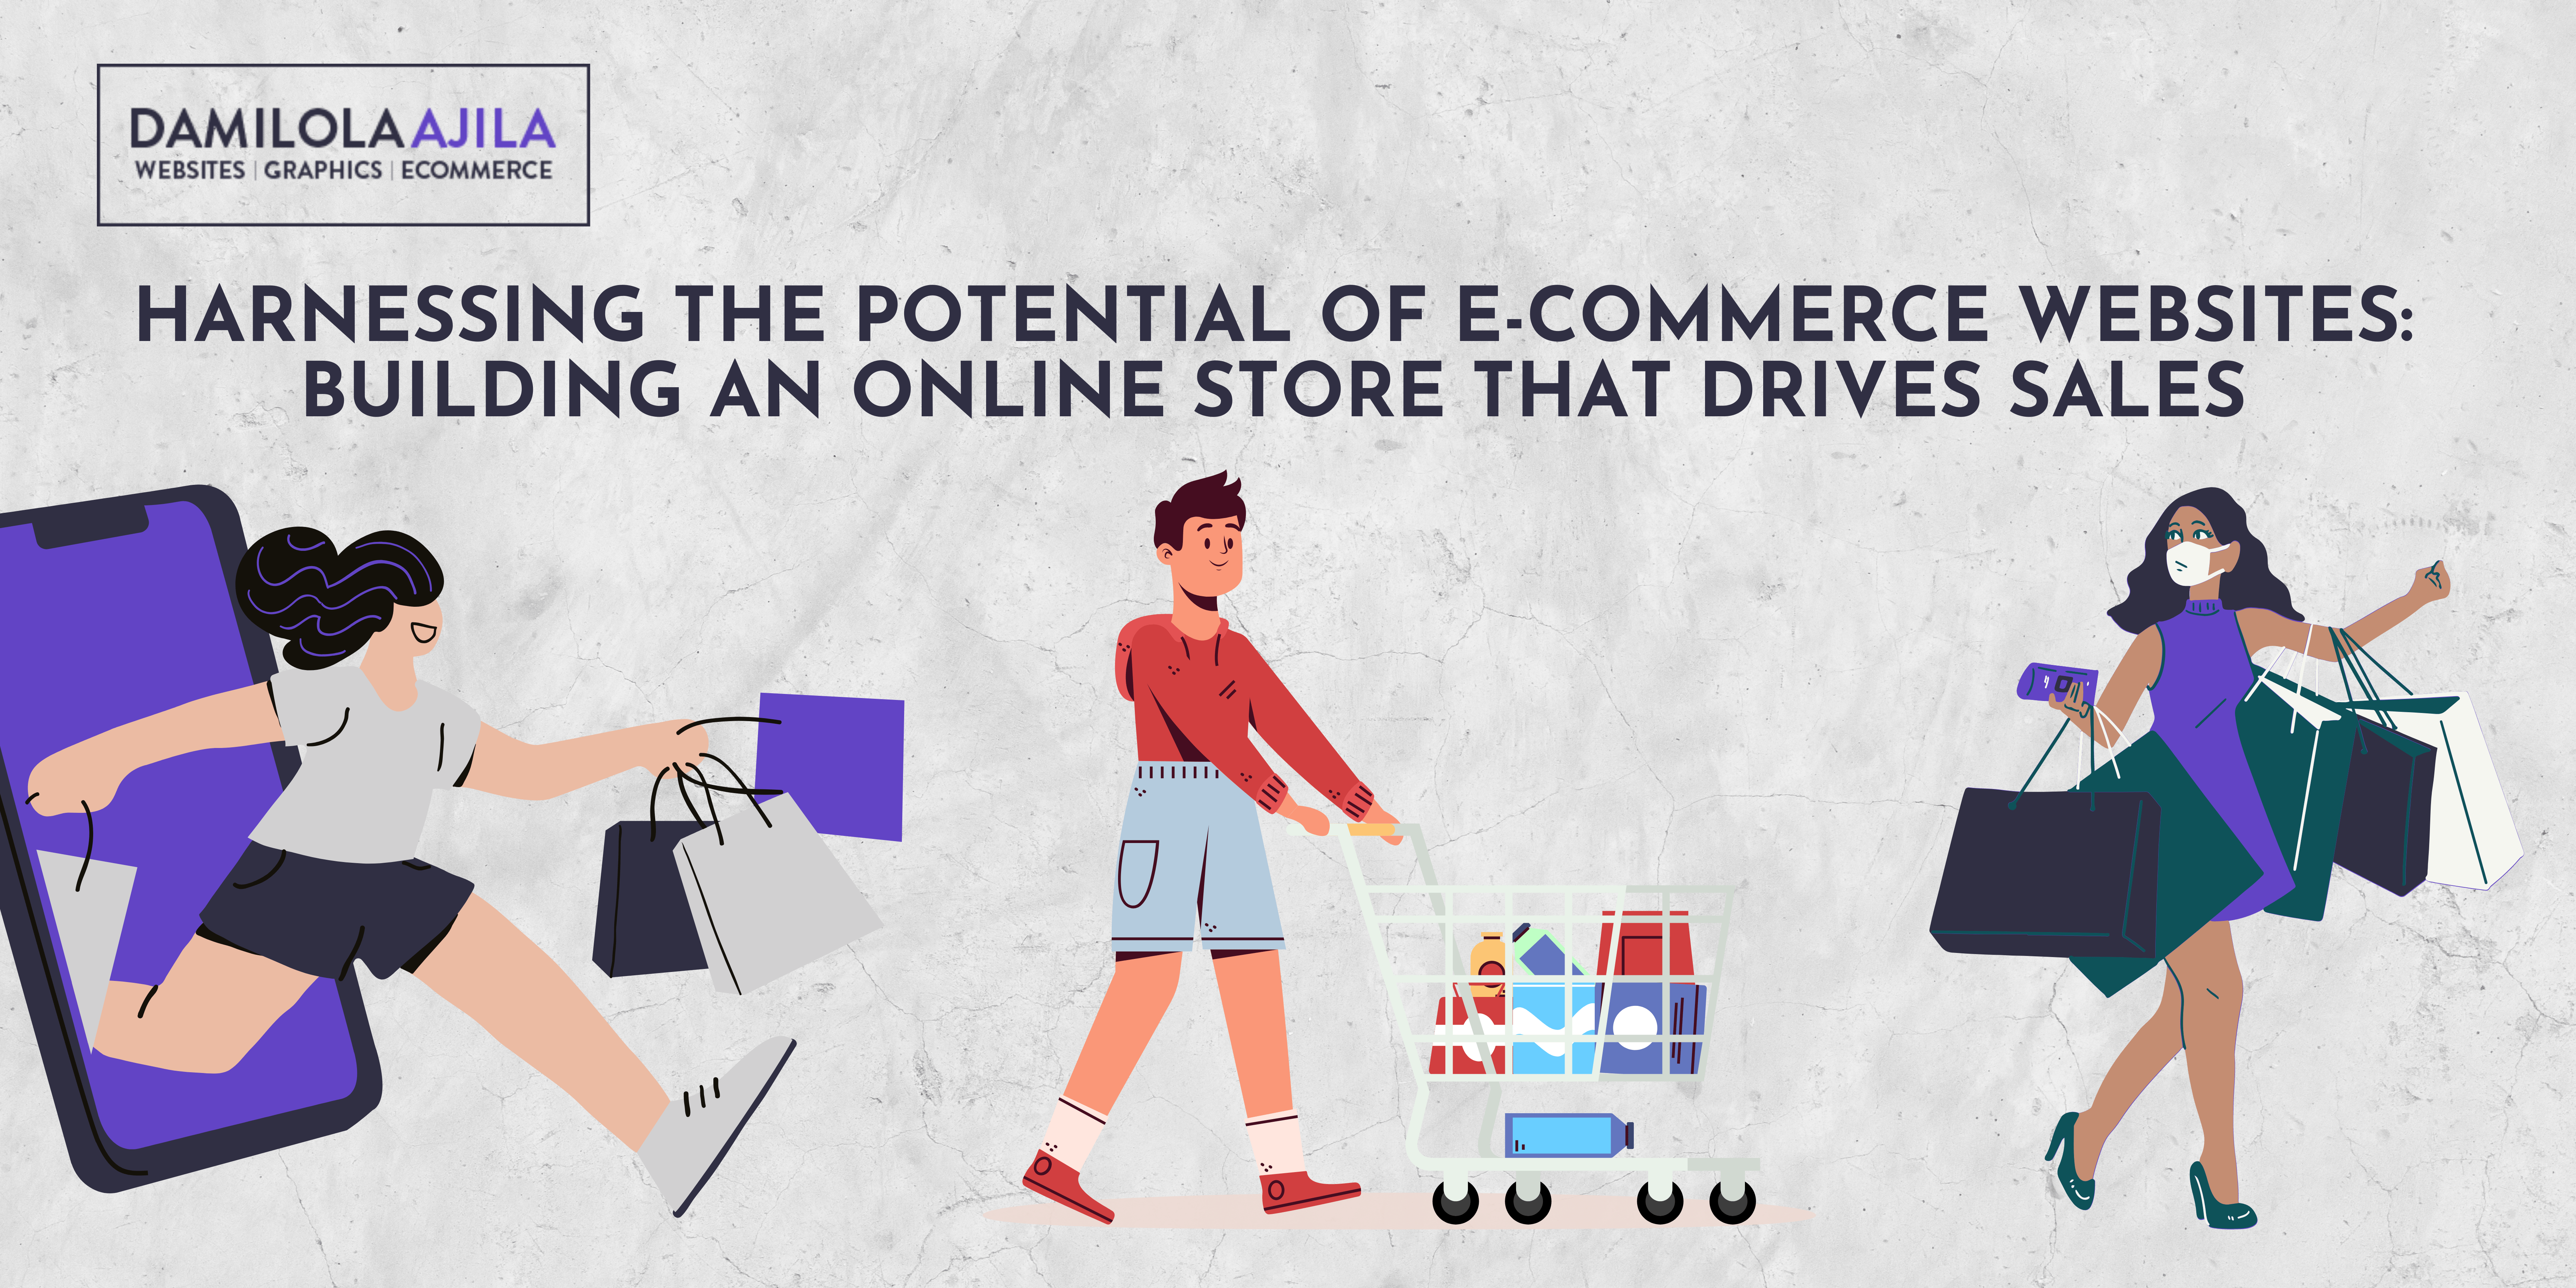 The Potential of E-commerce Websites